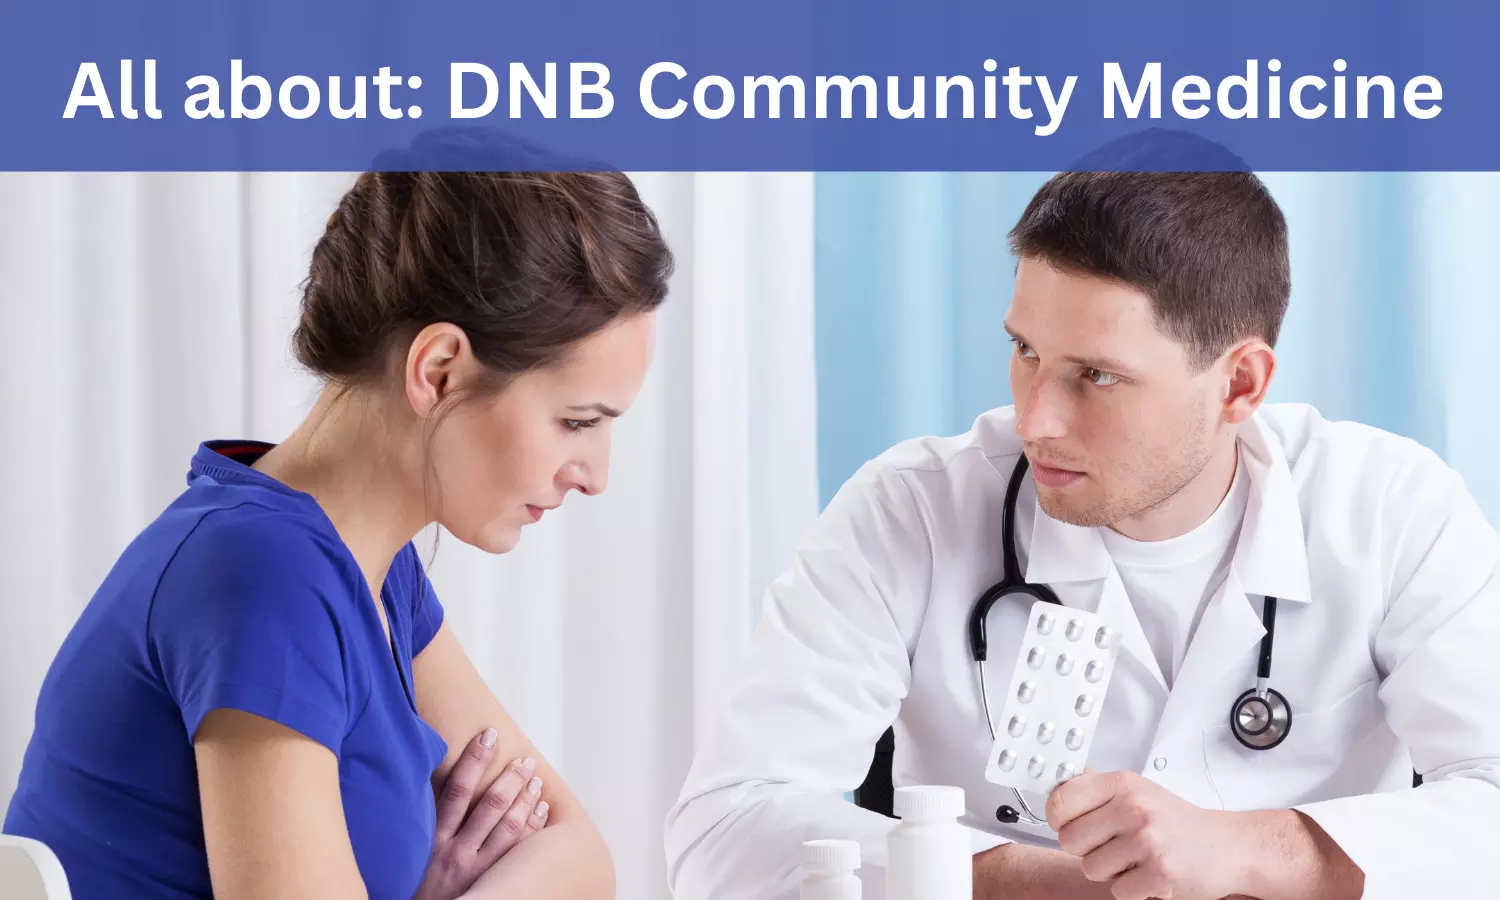 DNB Community Medicine: Admissions, Medical Colleges, Fee, Eligibility Criteria details here